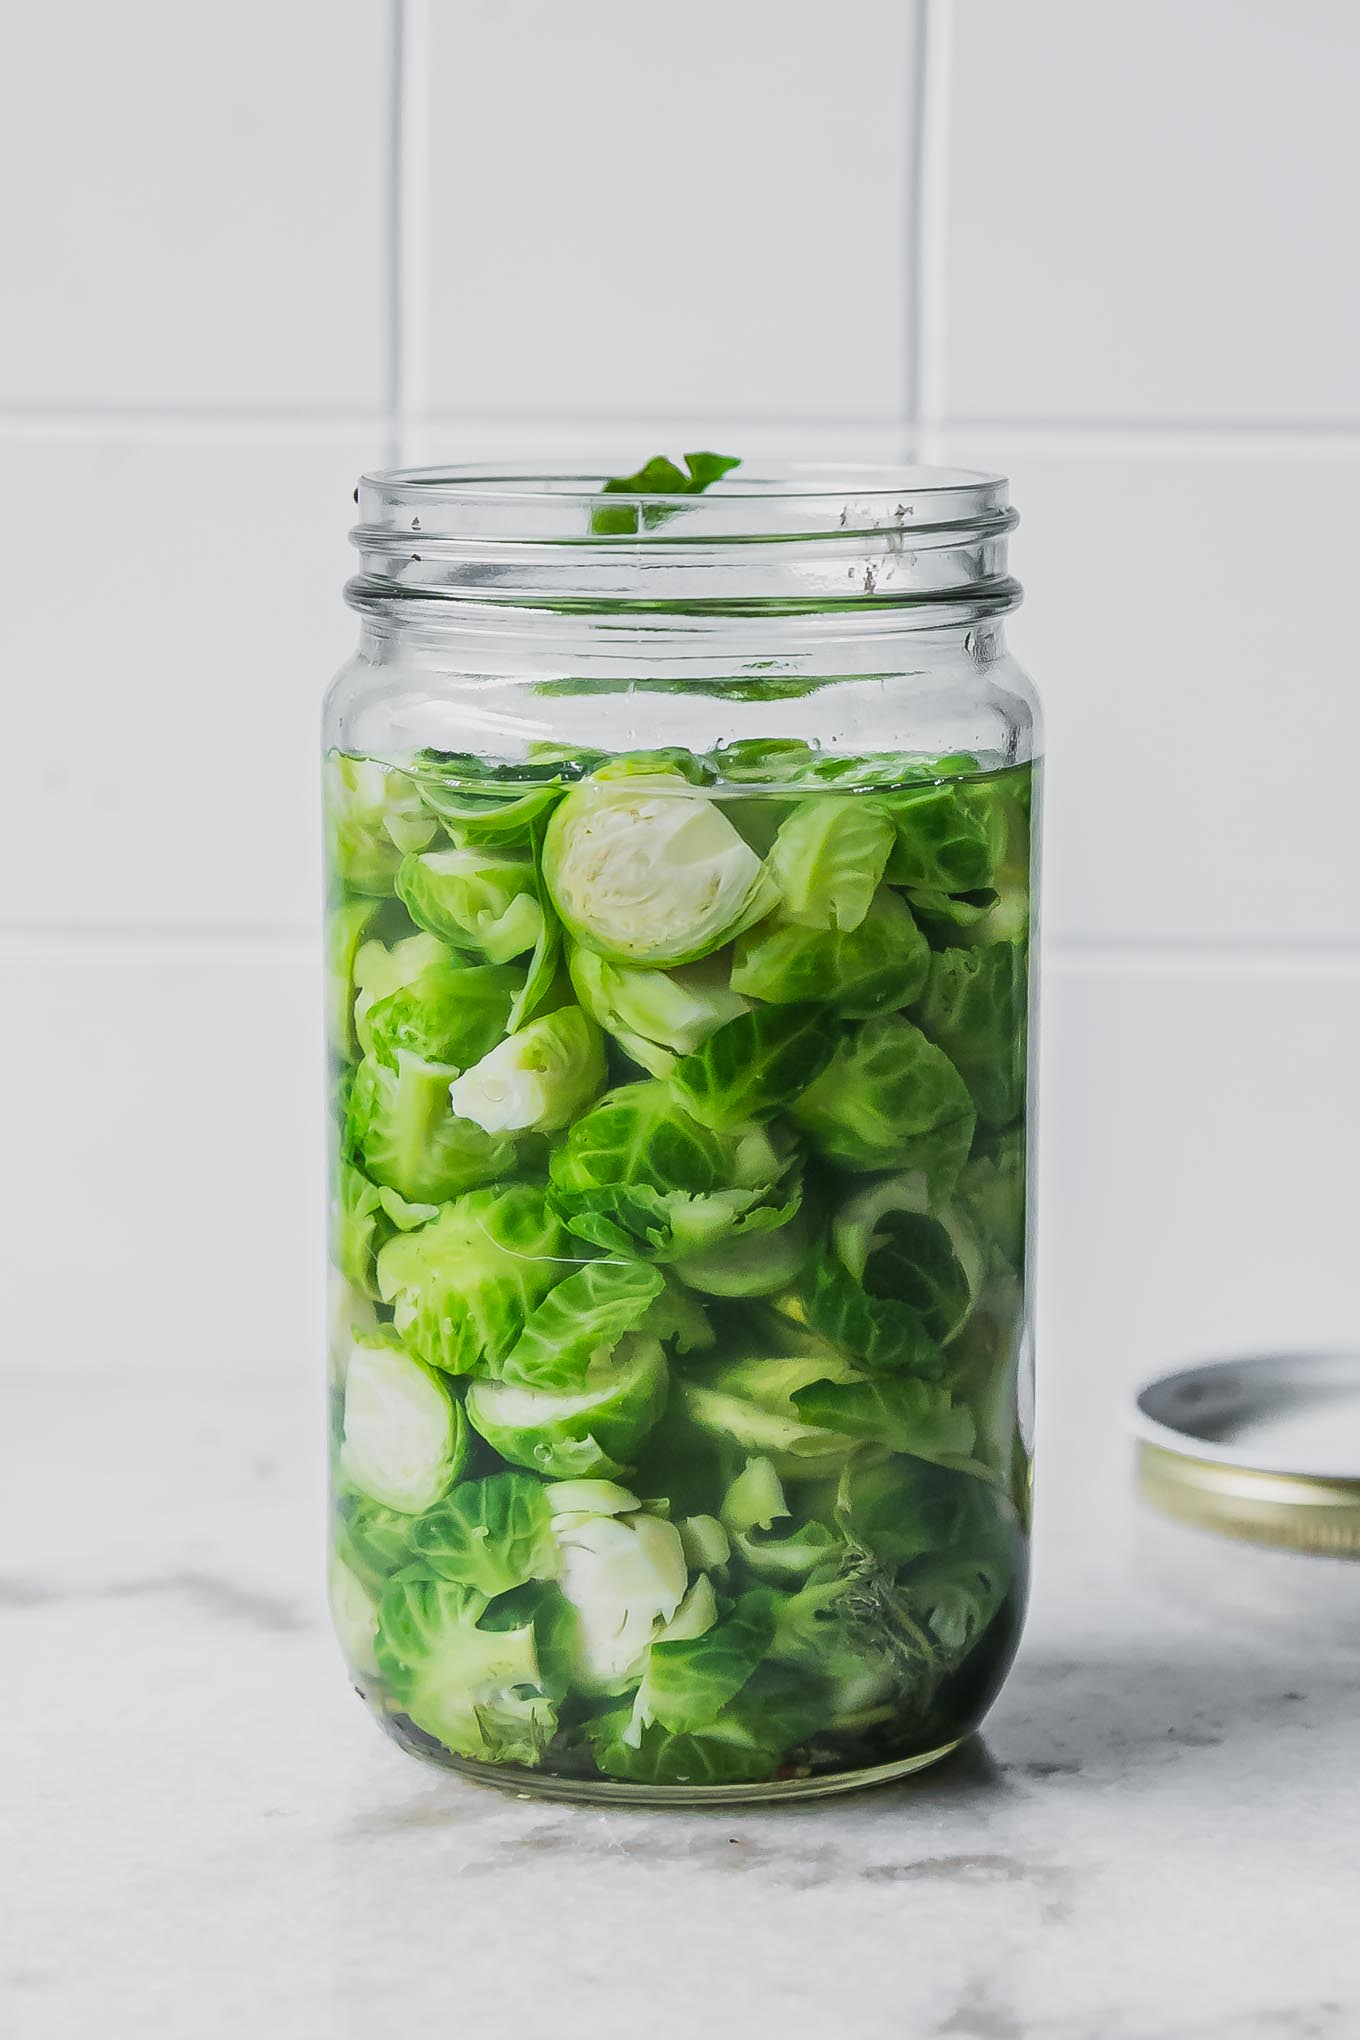 pickled brussels sprouts in a jar on a white countertop